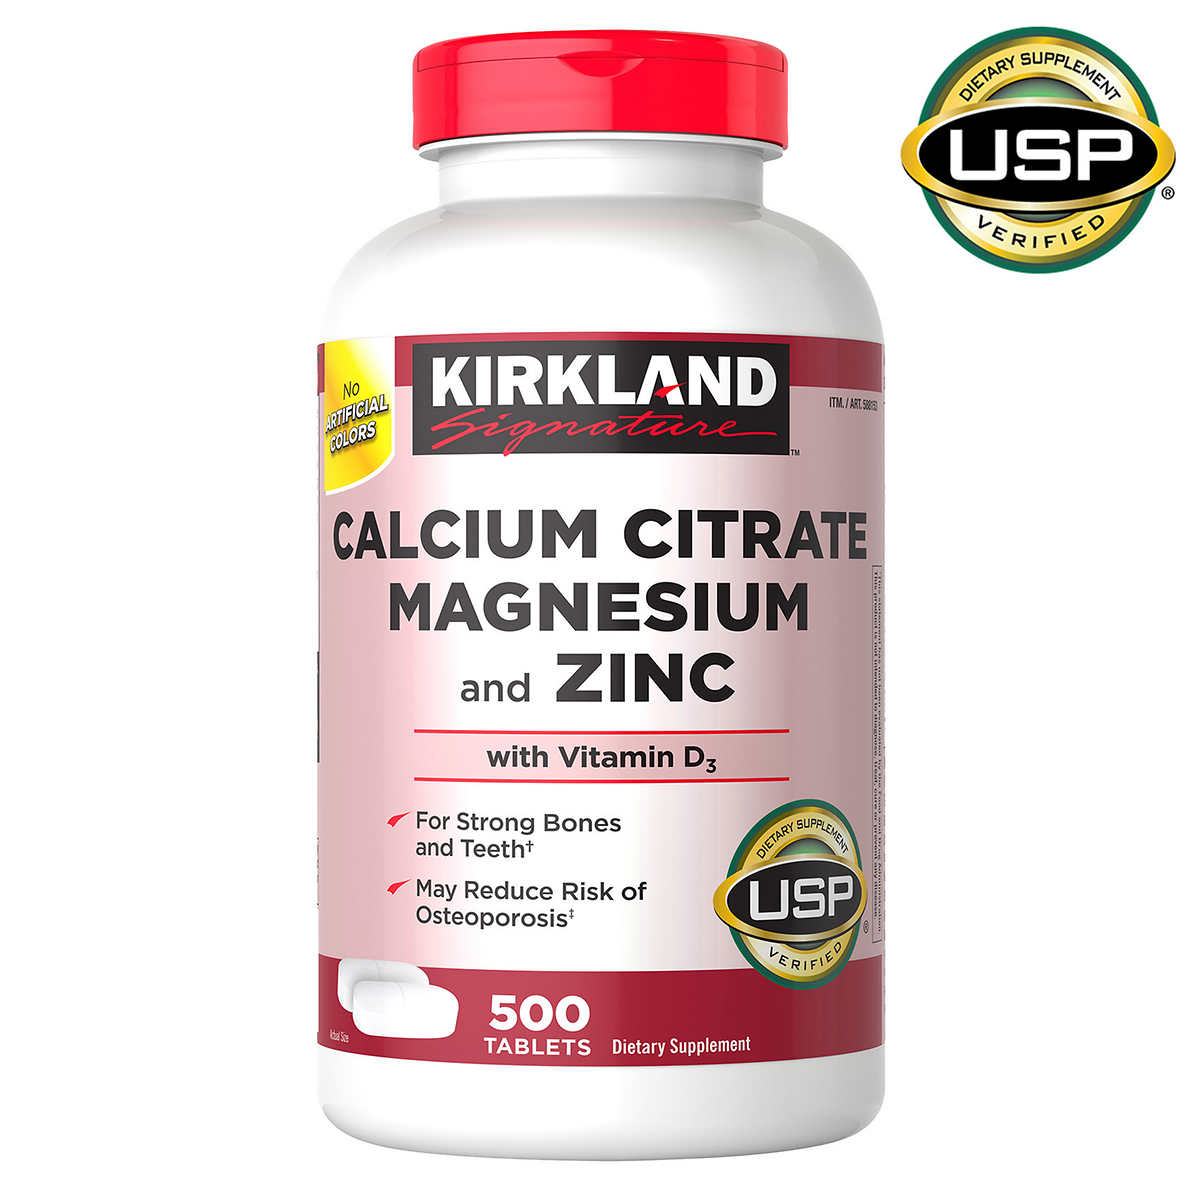 Review Viên Uống Calcium Citrate Magnesium And Zinc With Vitamin D3- 500 Viên